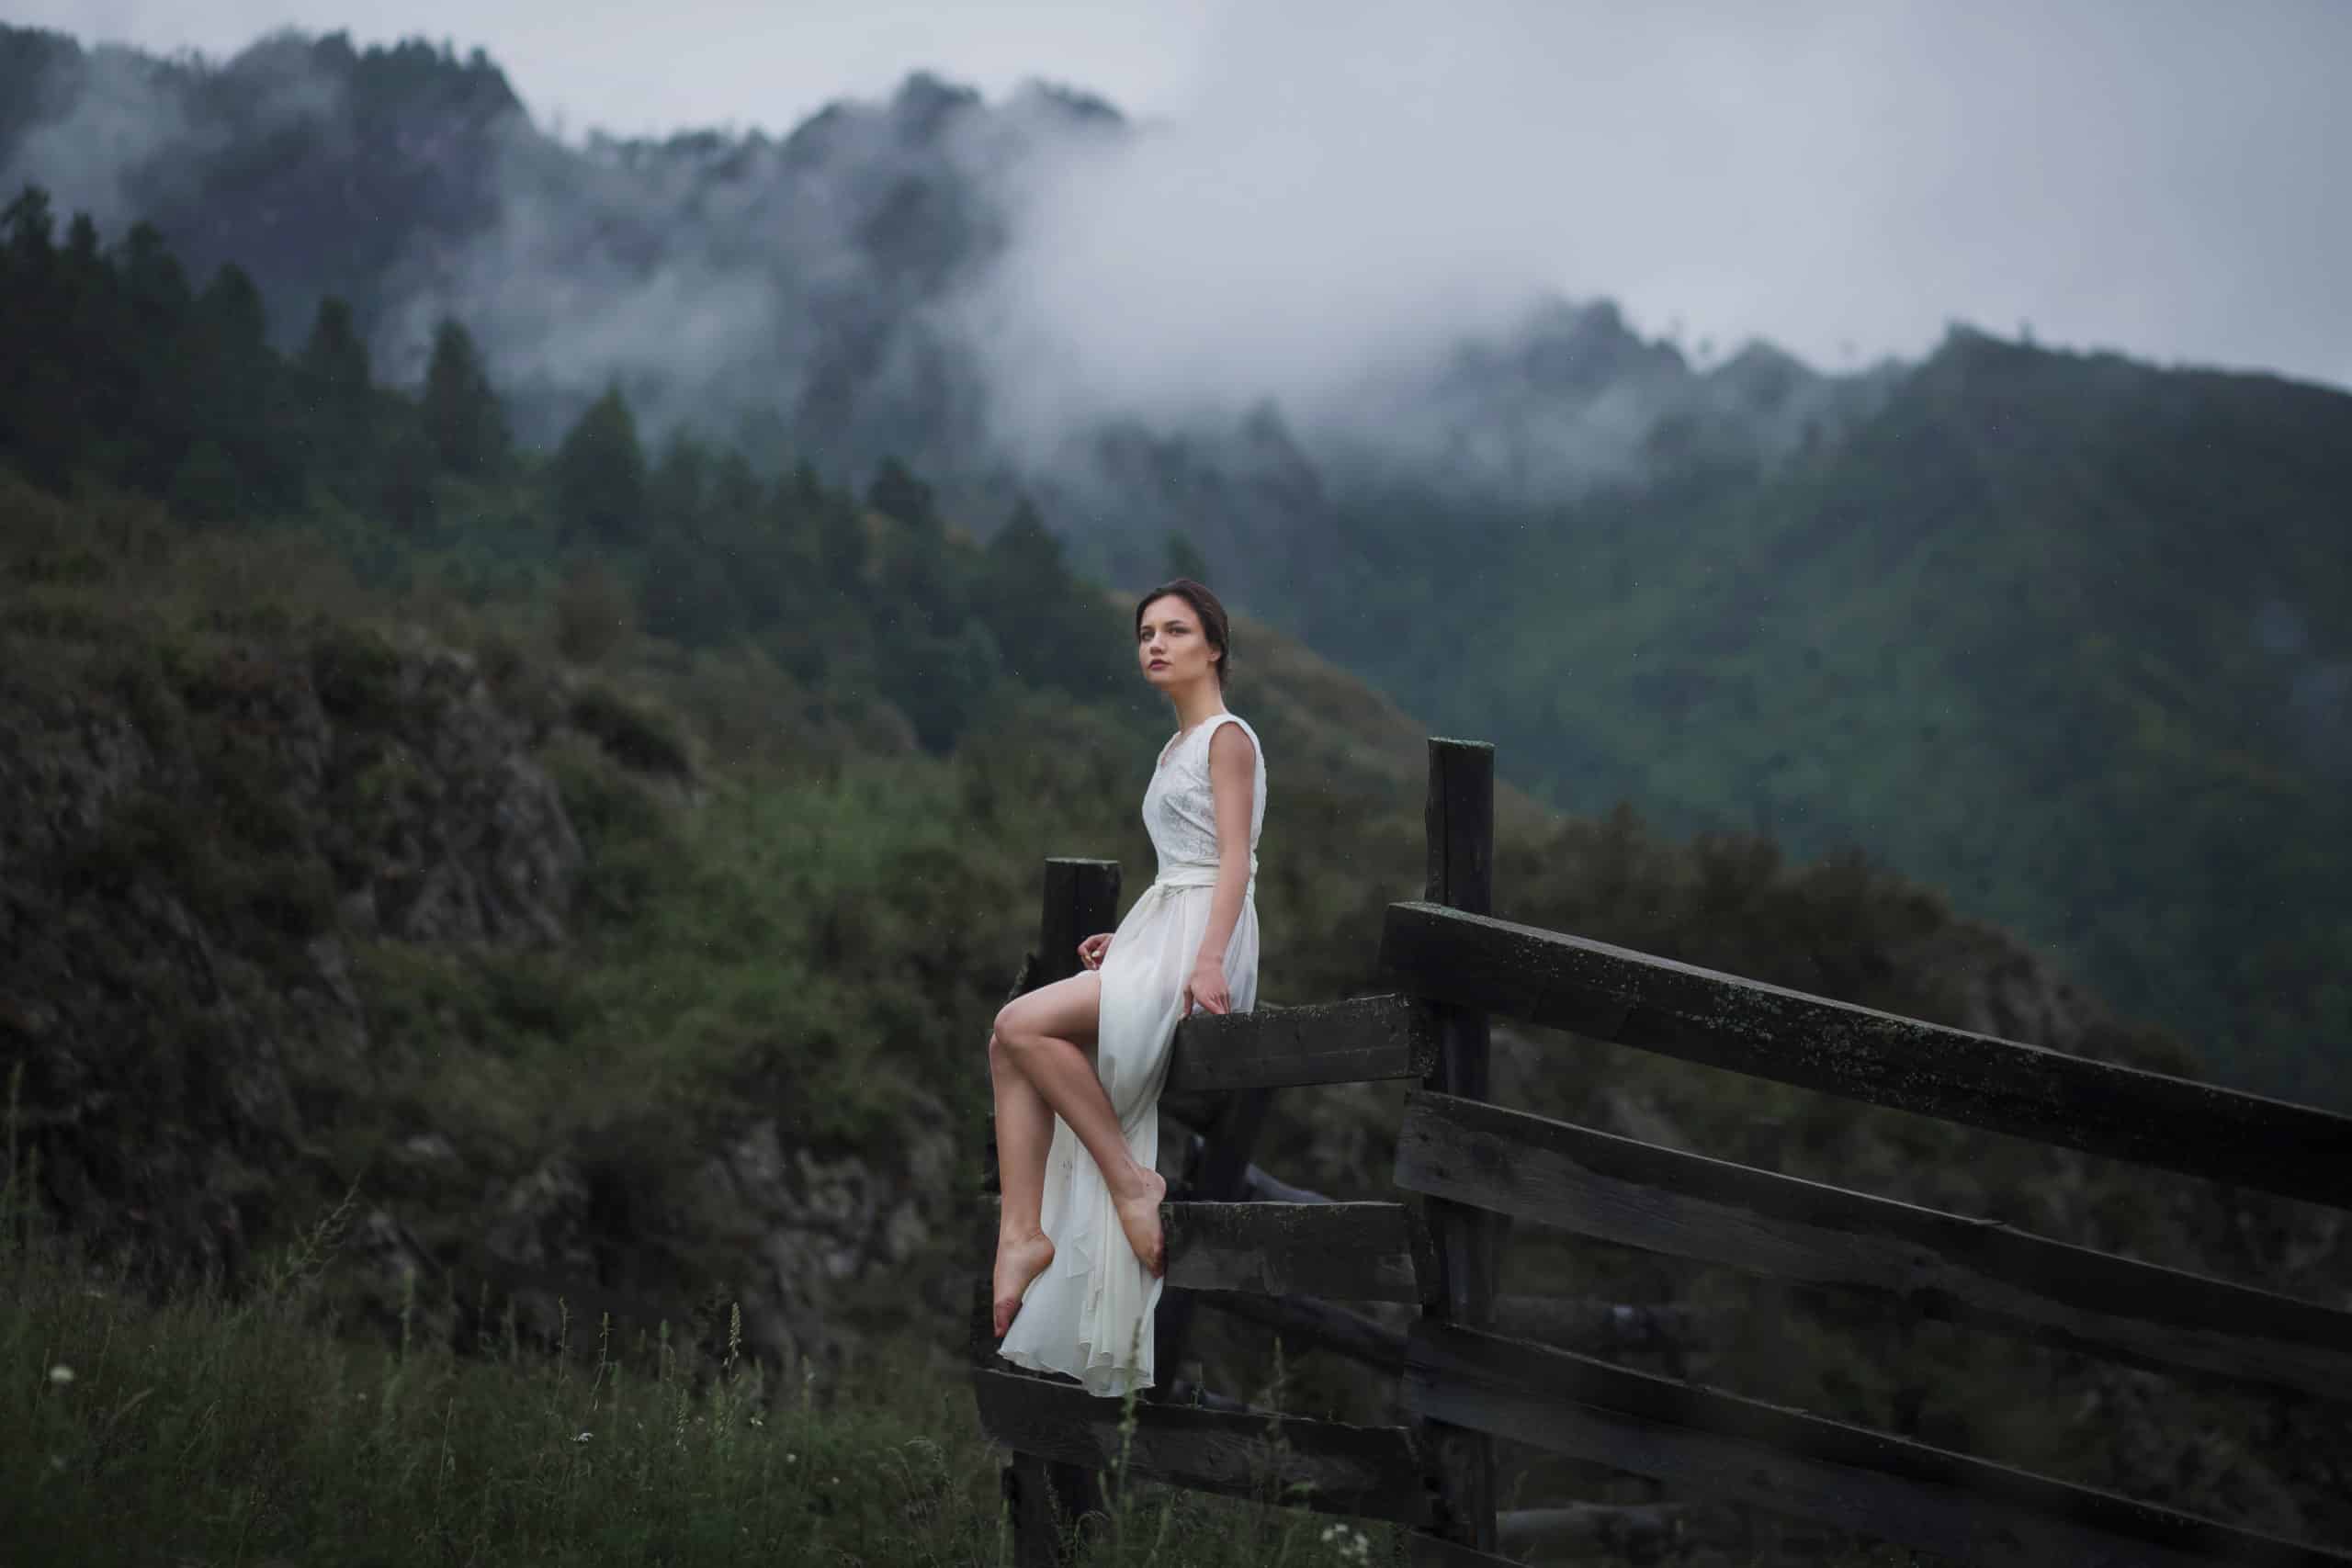 Lady in white sitting on a fence, fog in the background.